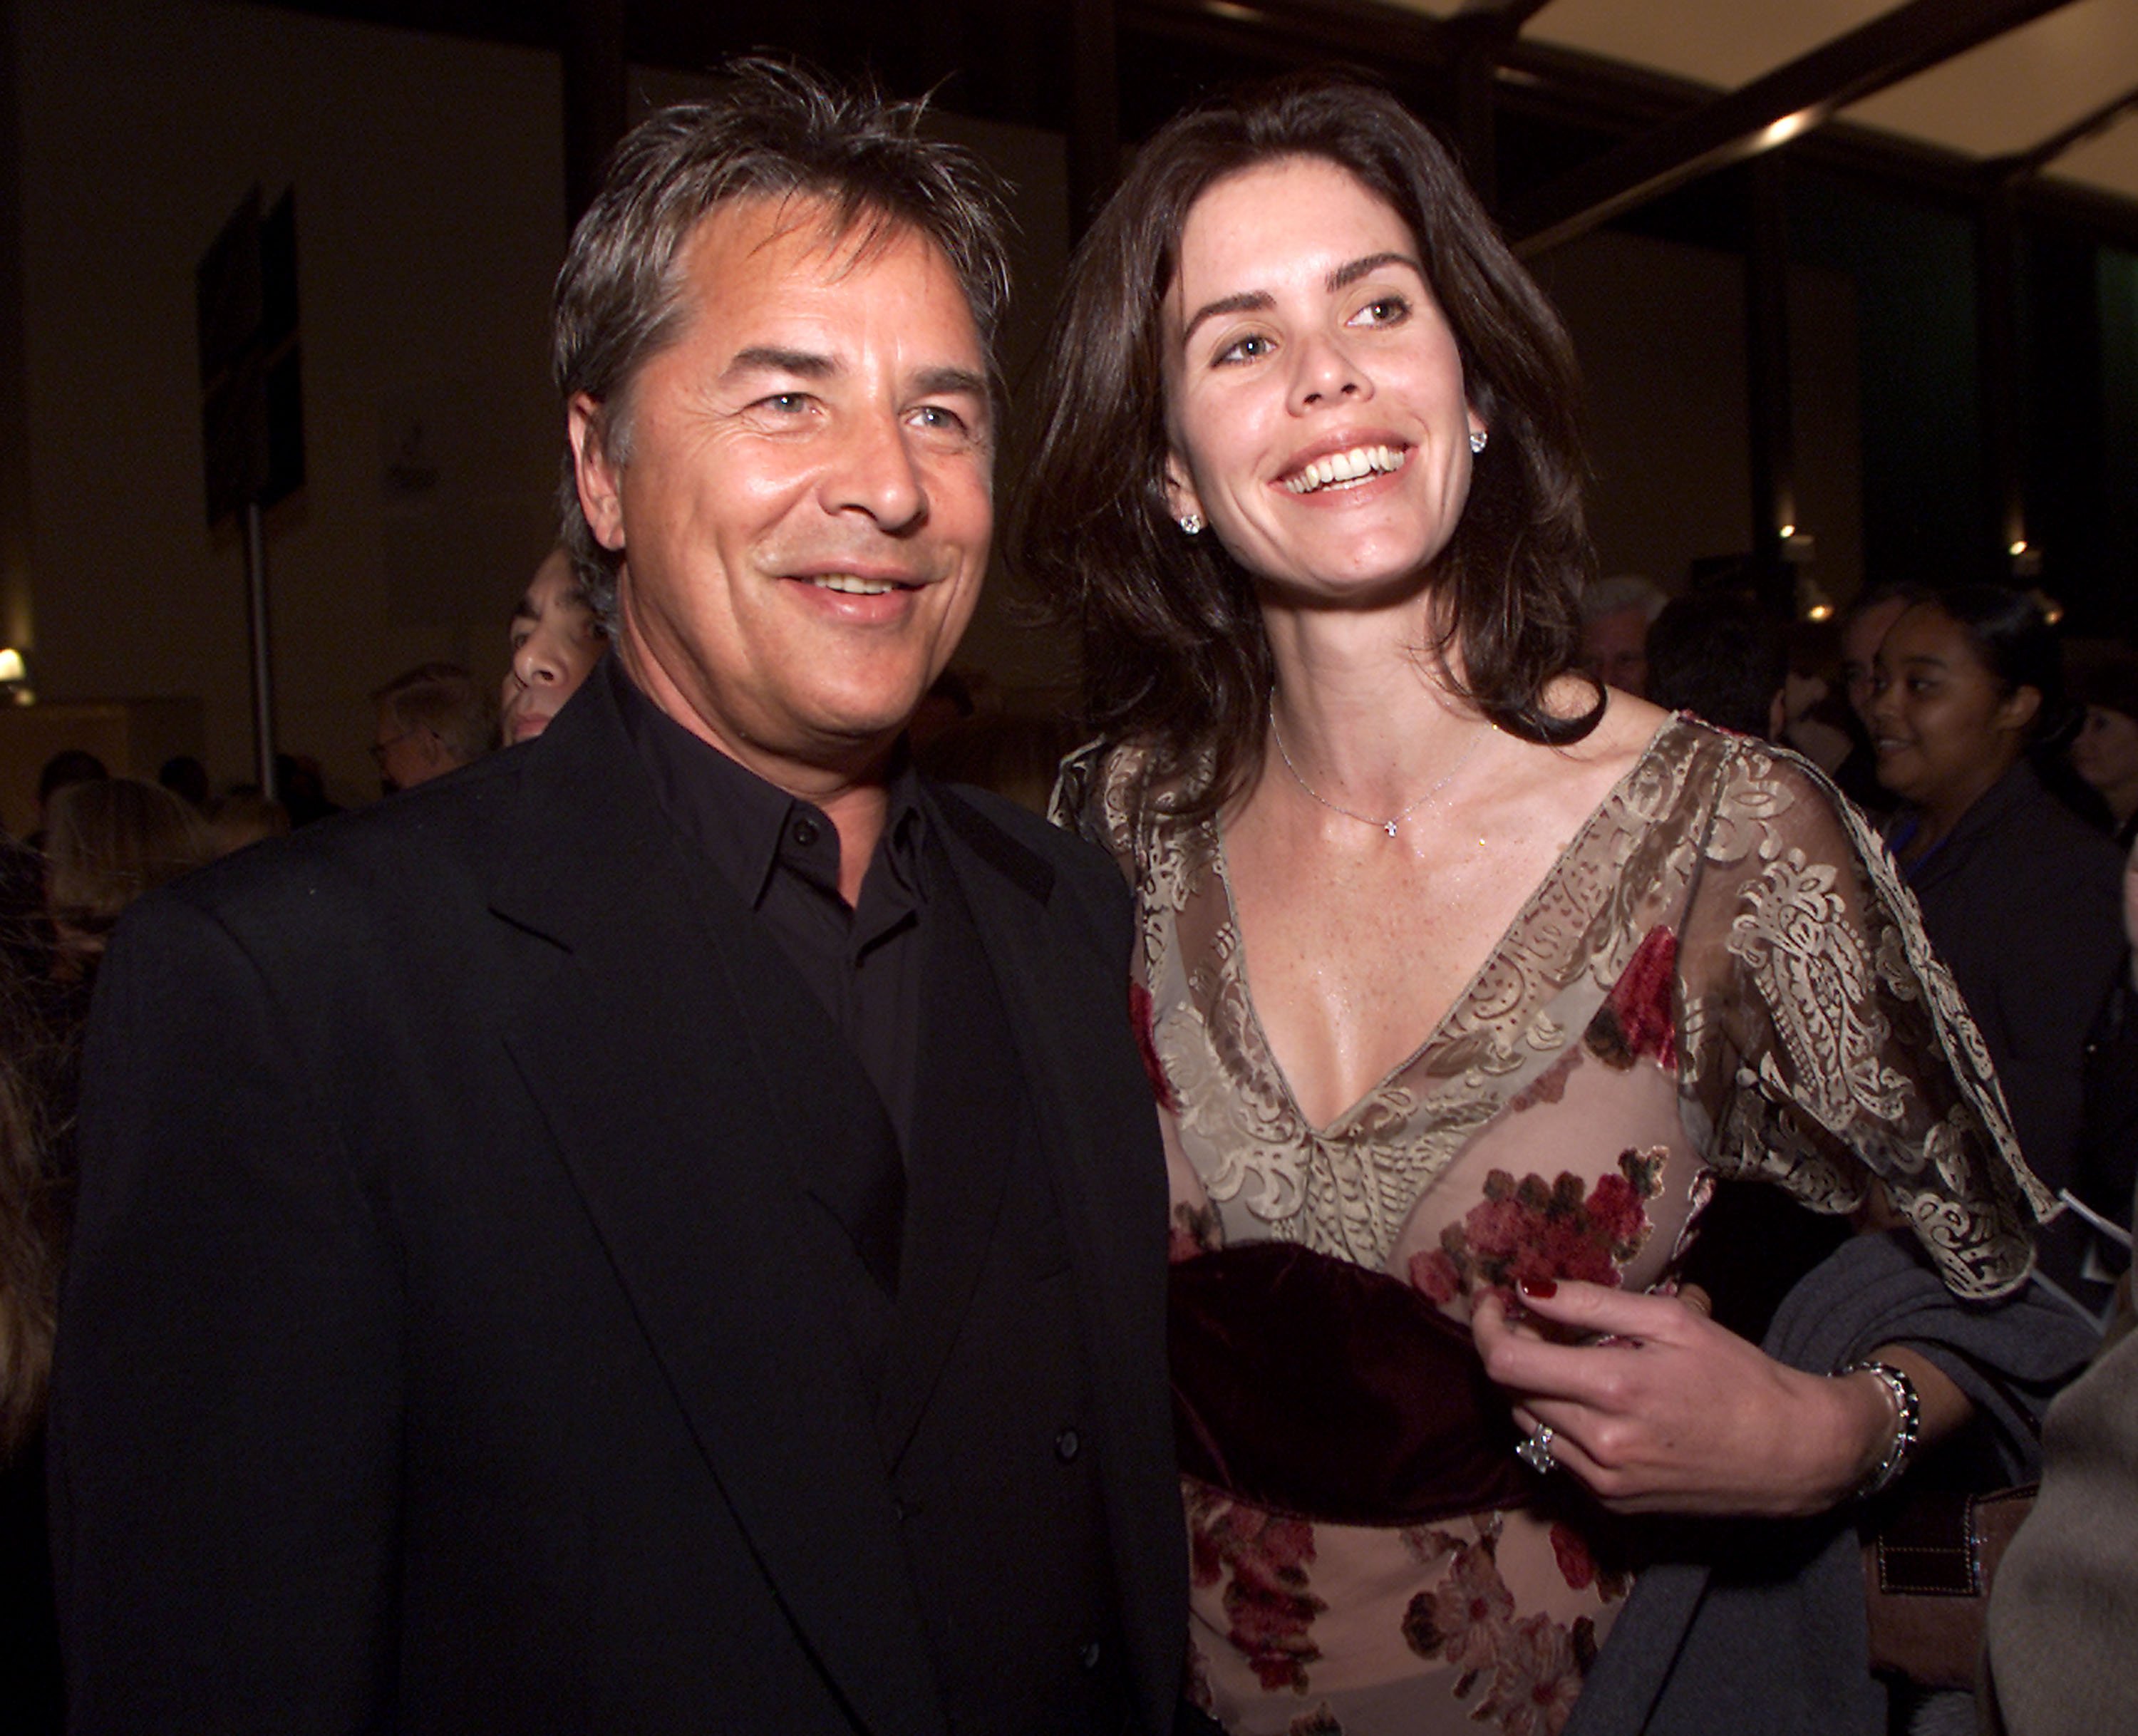 Don Johnson and Kelley Phleger at the Fulfillment Fund's "Stars 2001" Benefit Gala honoring Jeffrey Katzenberg in Los Angeles, California on November 8, 2001 | Source: Getty Images